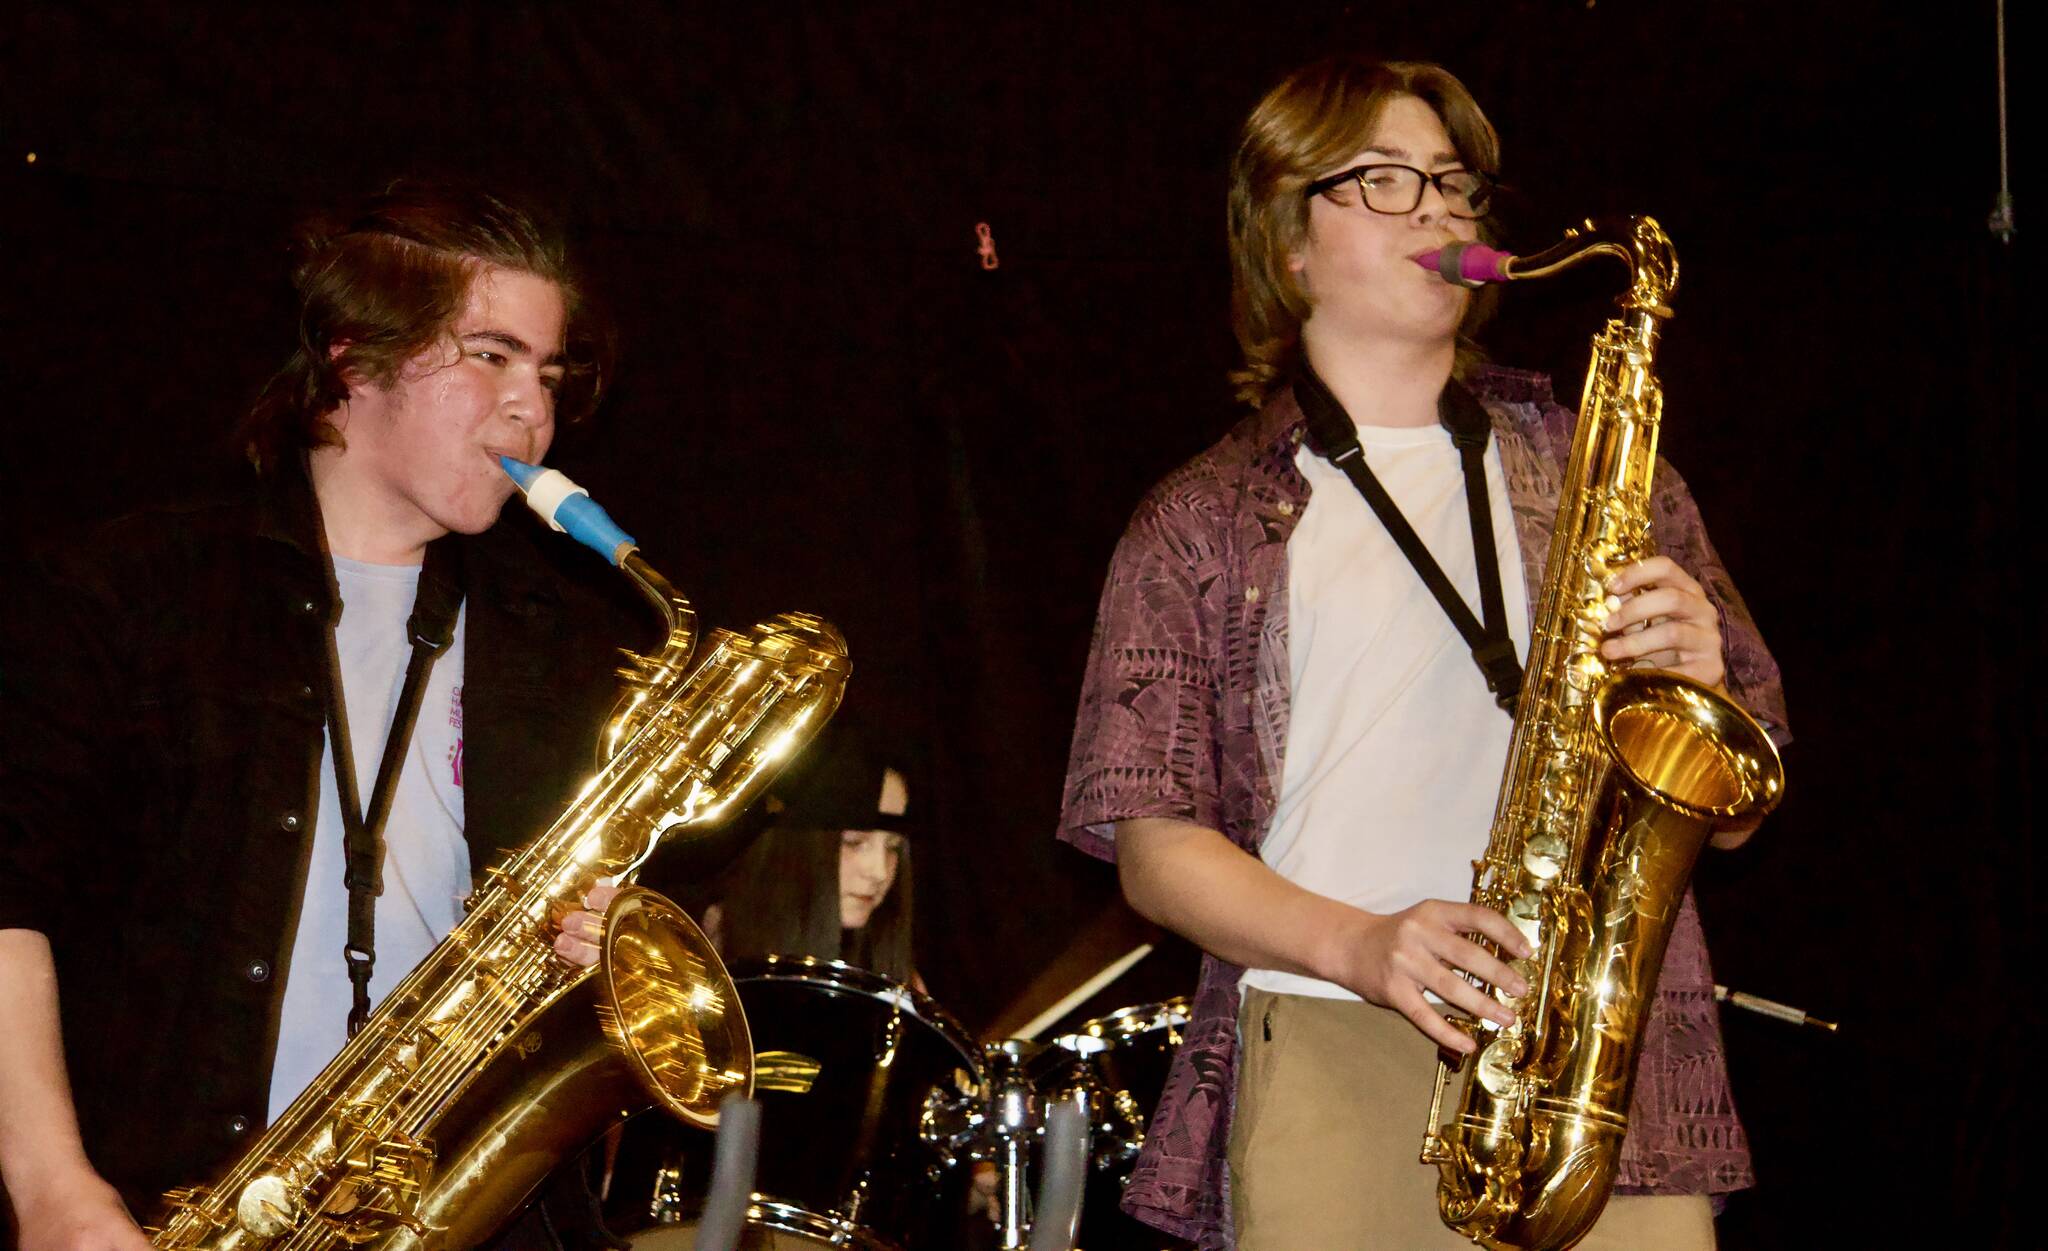 Photo by Rachel Rosen/Whidbey News-Times
From left, Ethan Tang and Oliver Abercrombie are the sax players in Kick-Brass.